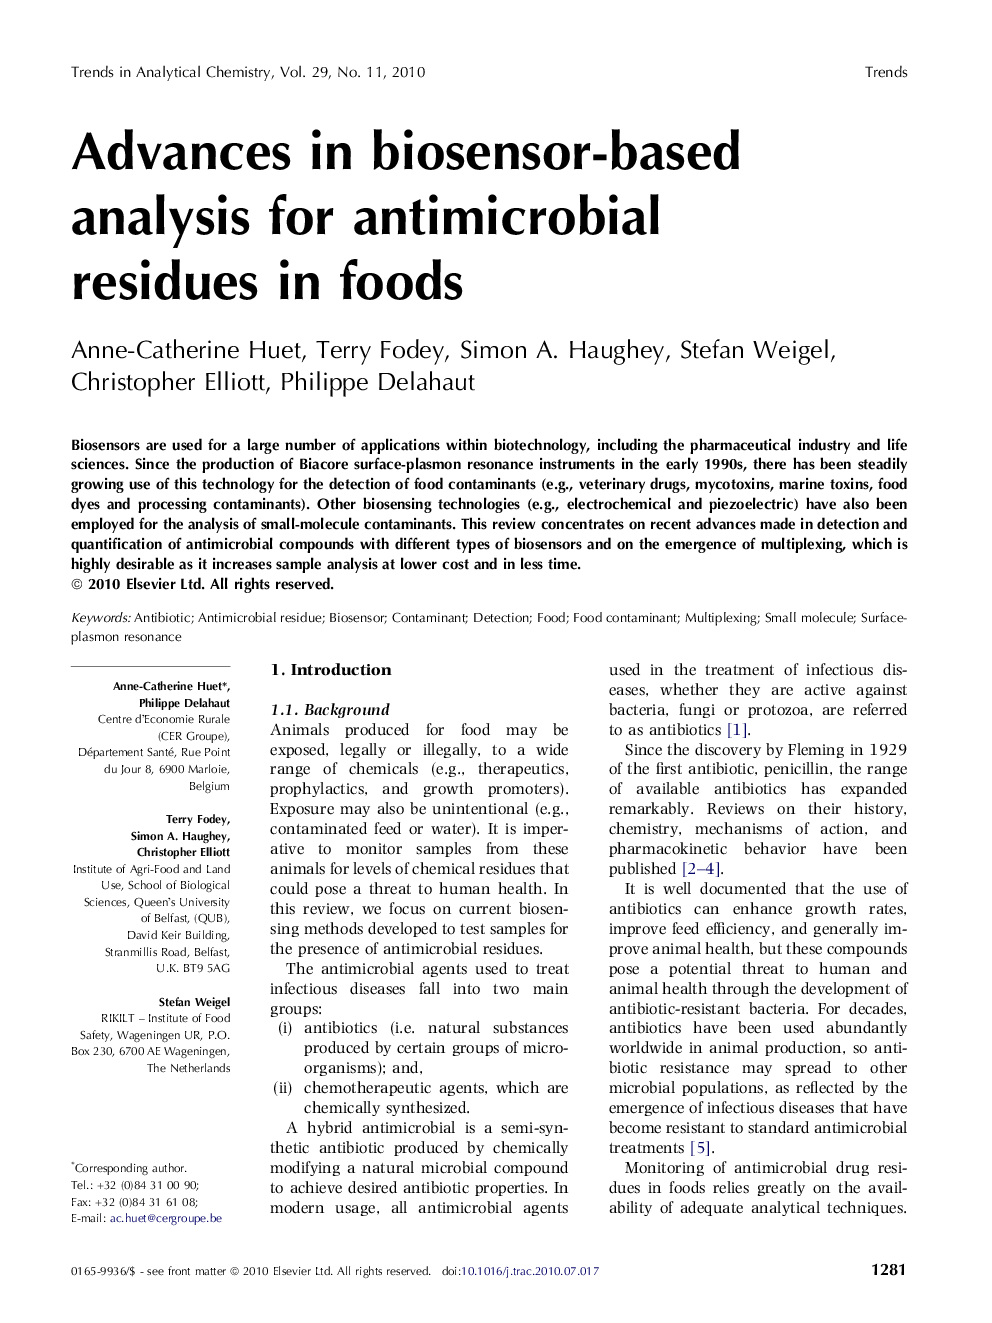 Advances in biosensor-based analysis for antimicrobial residues in foods